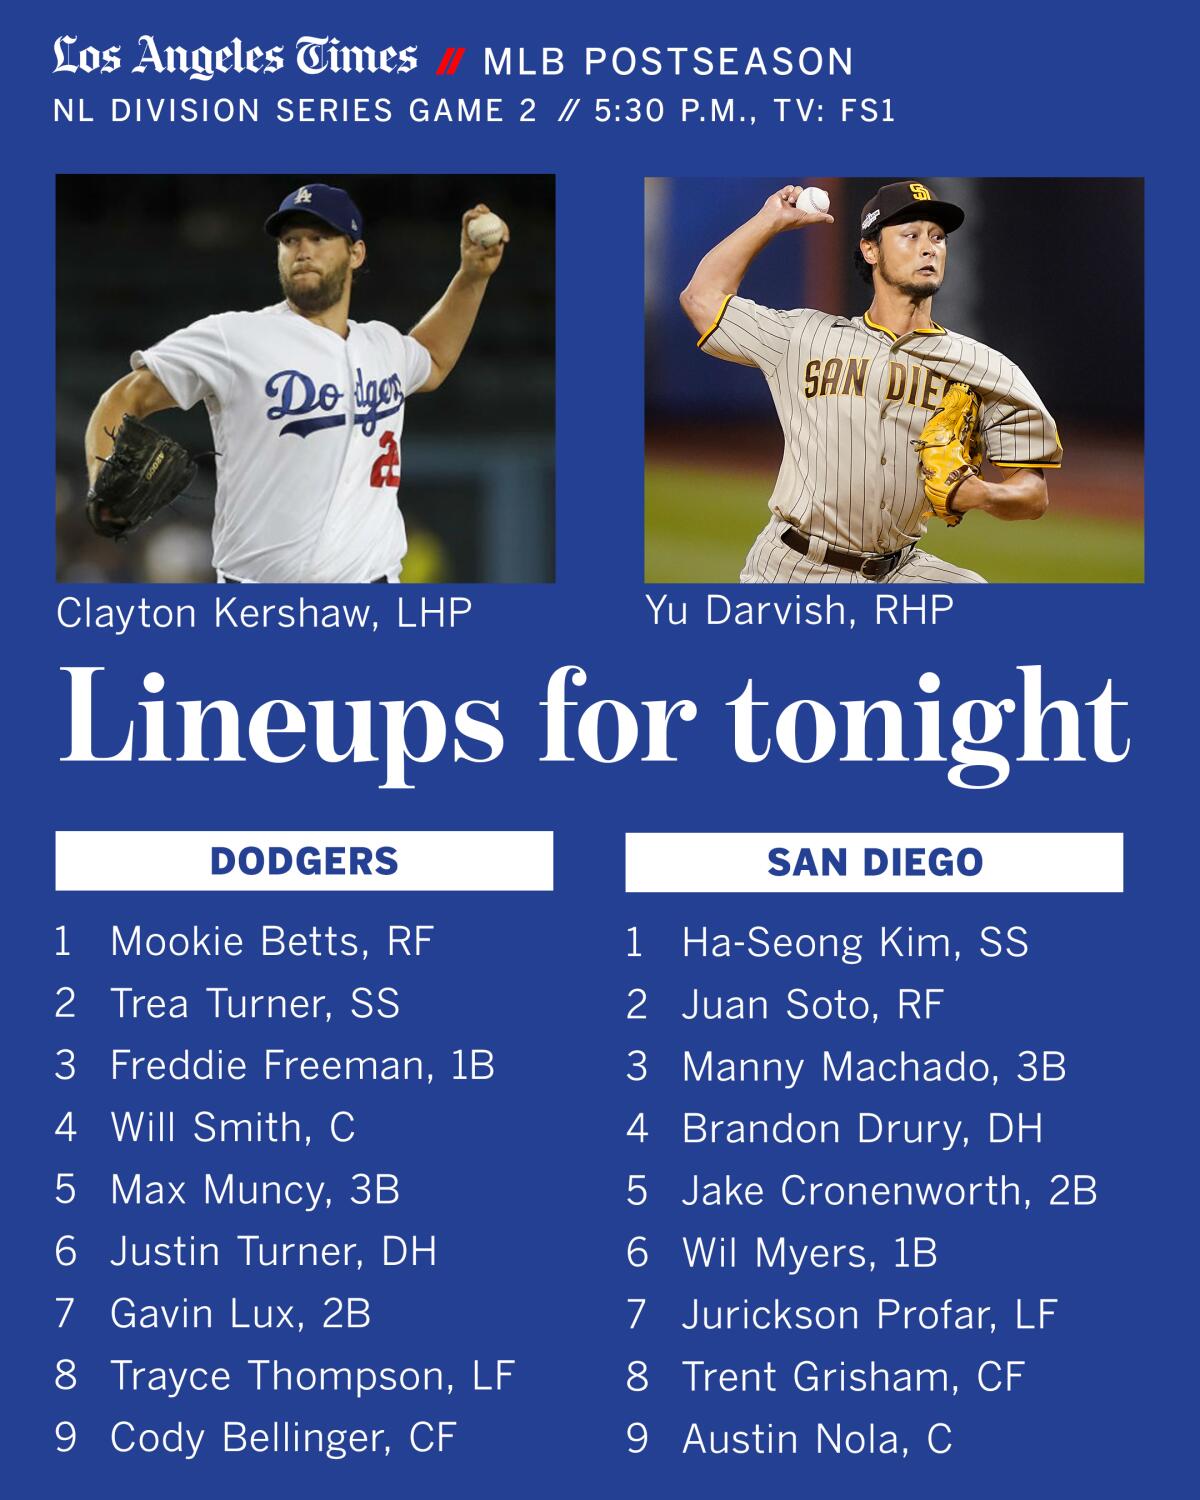 NLDS Game 2 lineups